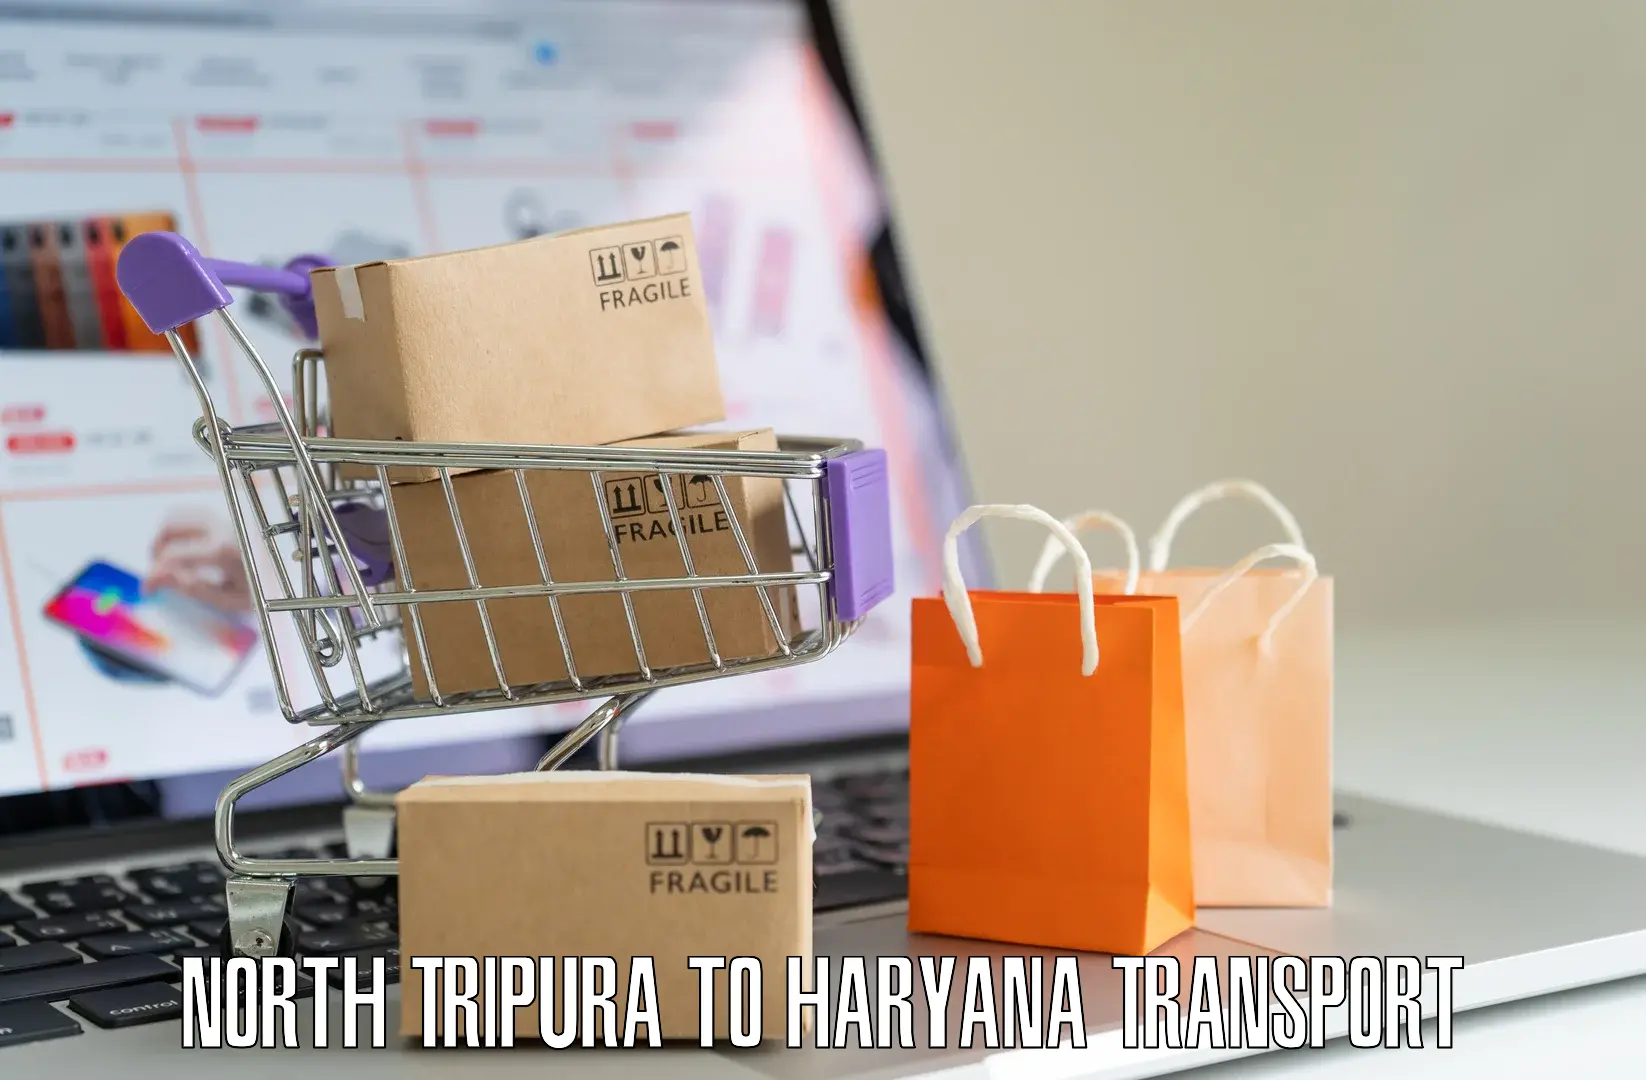 Nearby transport service North Tripura to Narnaul